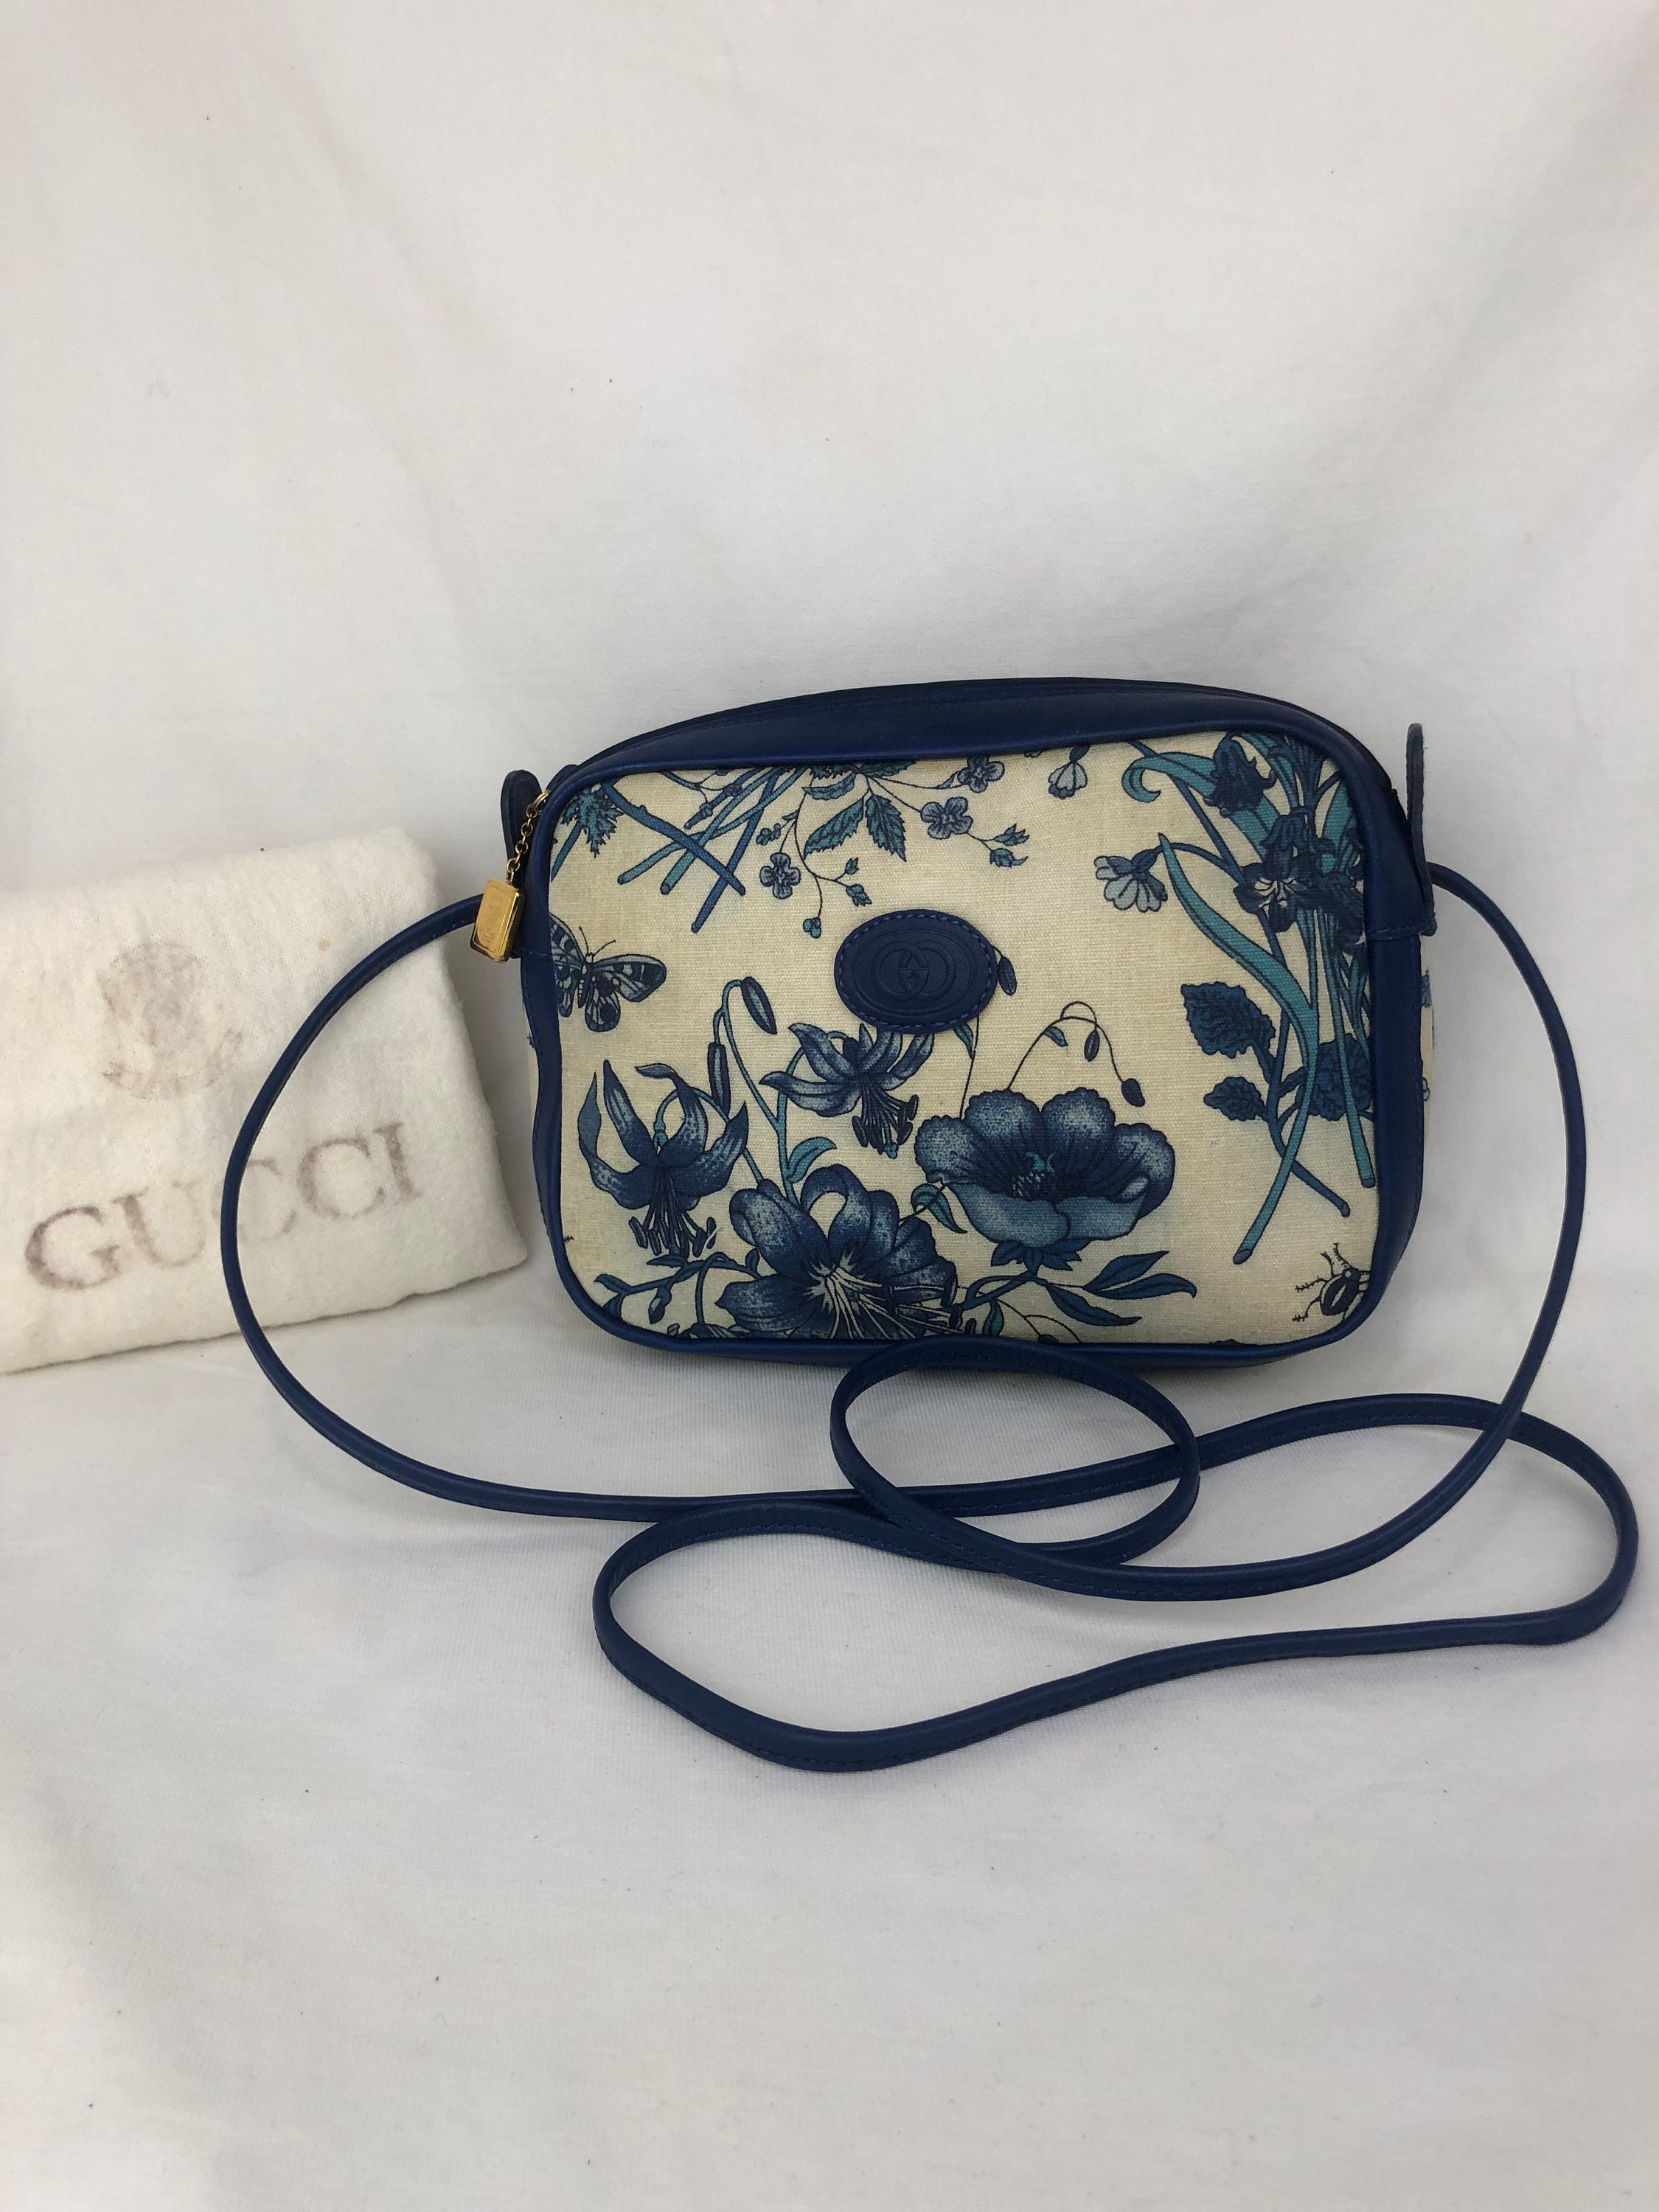 Sold at Auction: GUCCI Cosmetic Bag TOILETRY BAG.